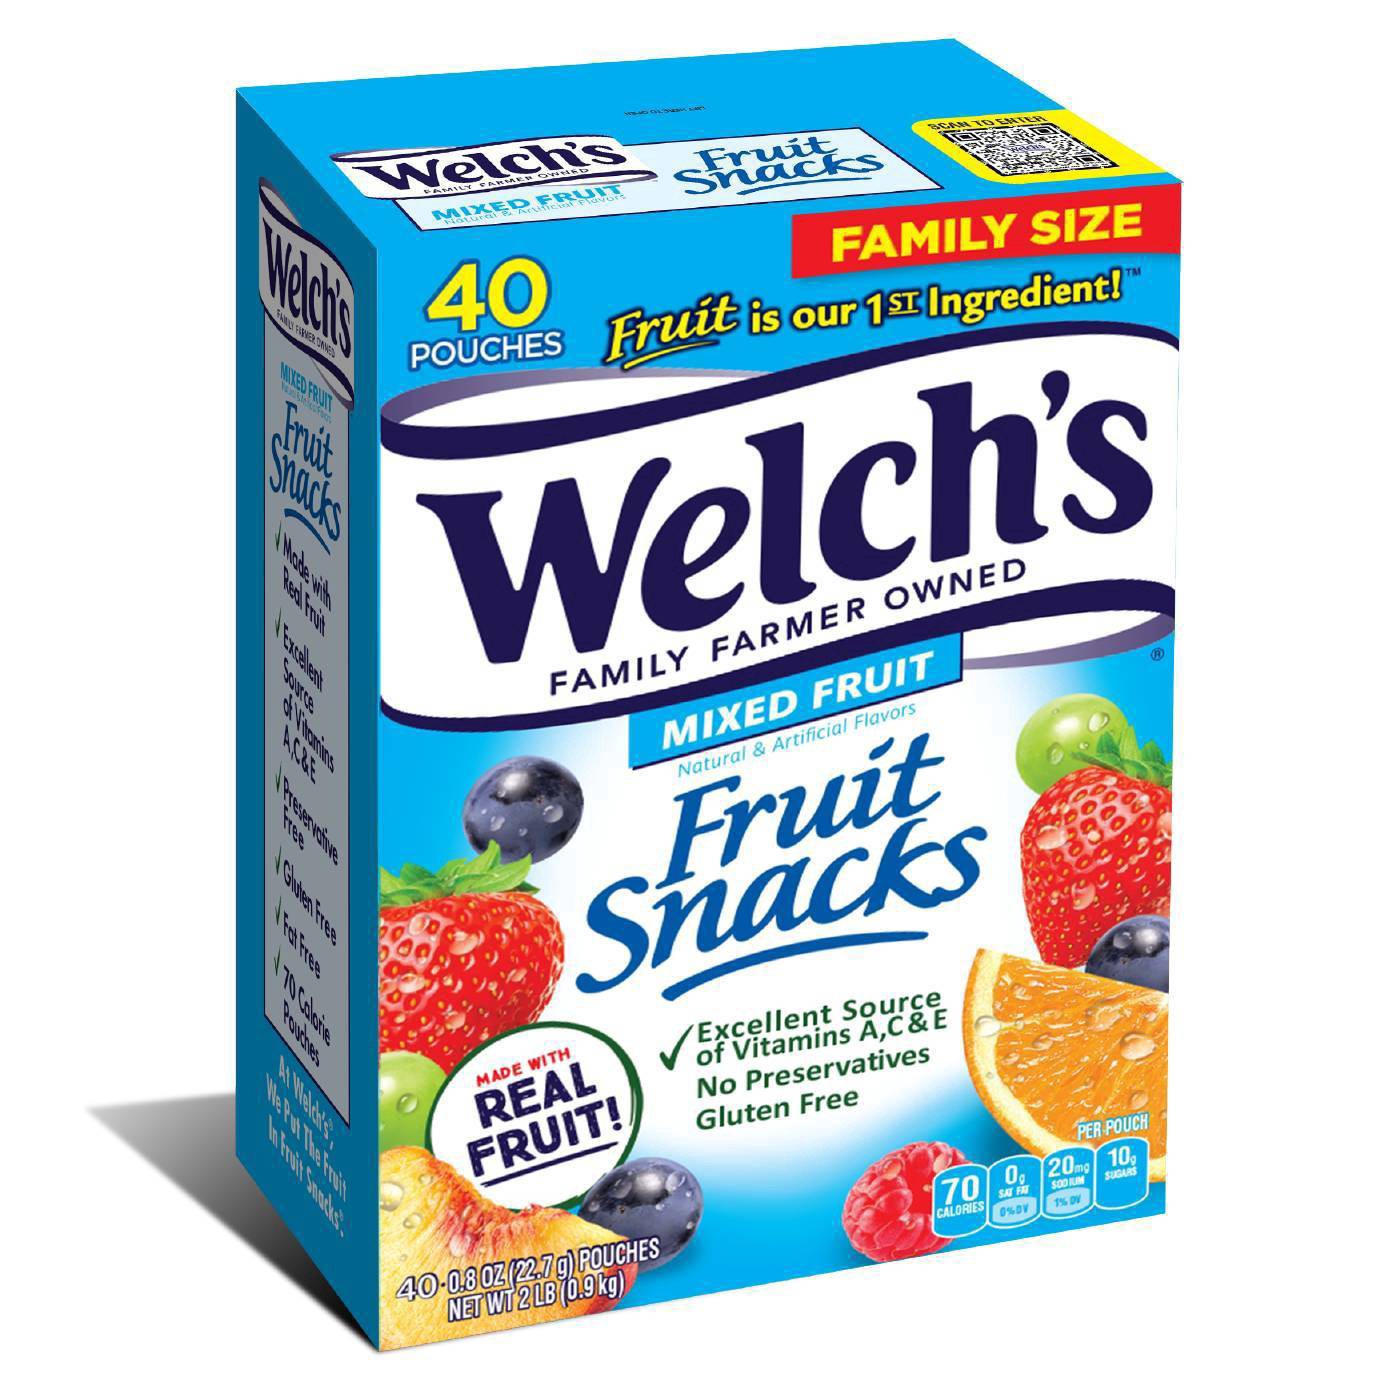 slide 3 of 7, Welch's Mixed Fruit Fruit Snacks Family Size 40 - 0.8 oz Pouches, 40 ct